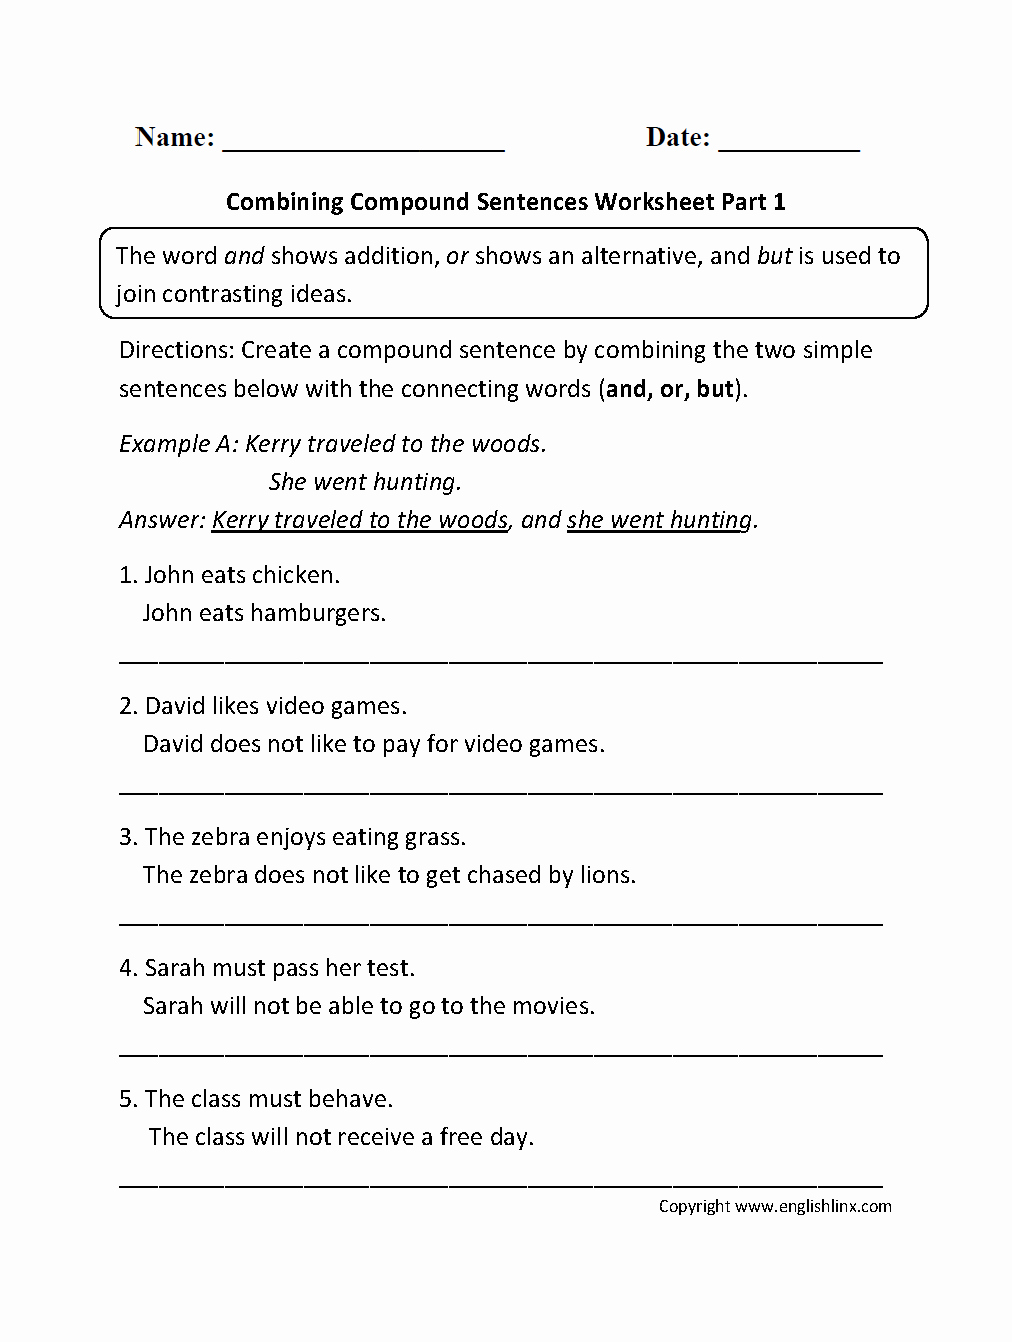 Compound Sentences Worksheet with Answers Beautiful Bining Pound Sentences Worksheet Part 1